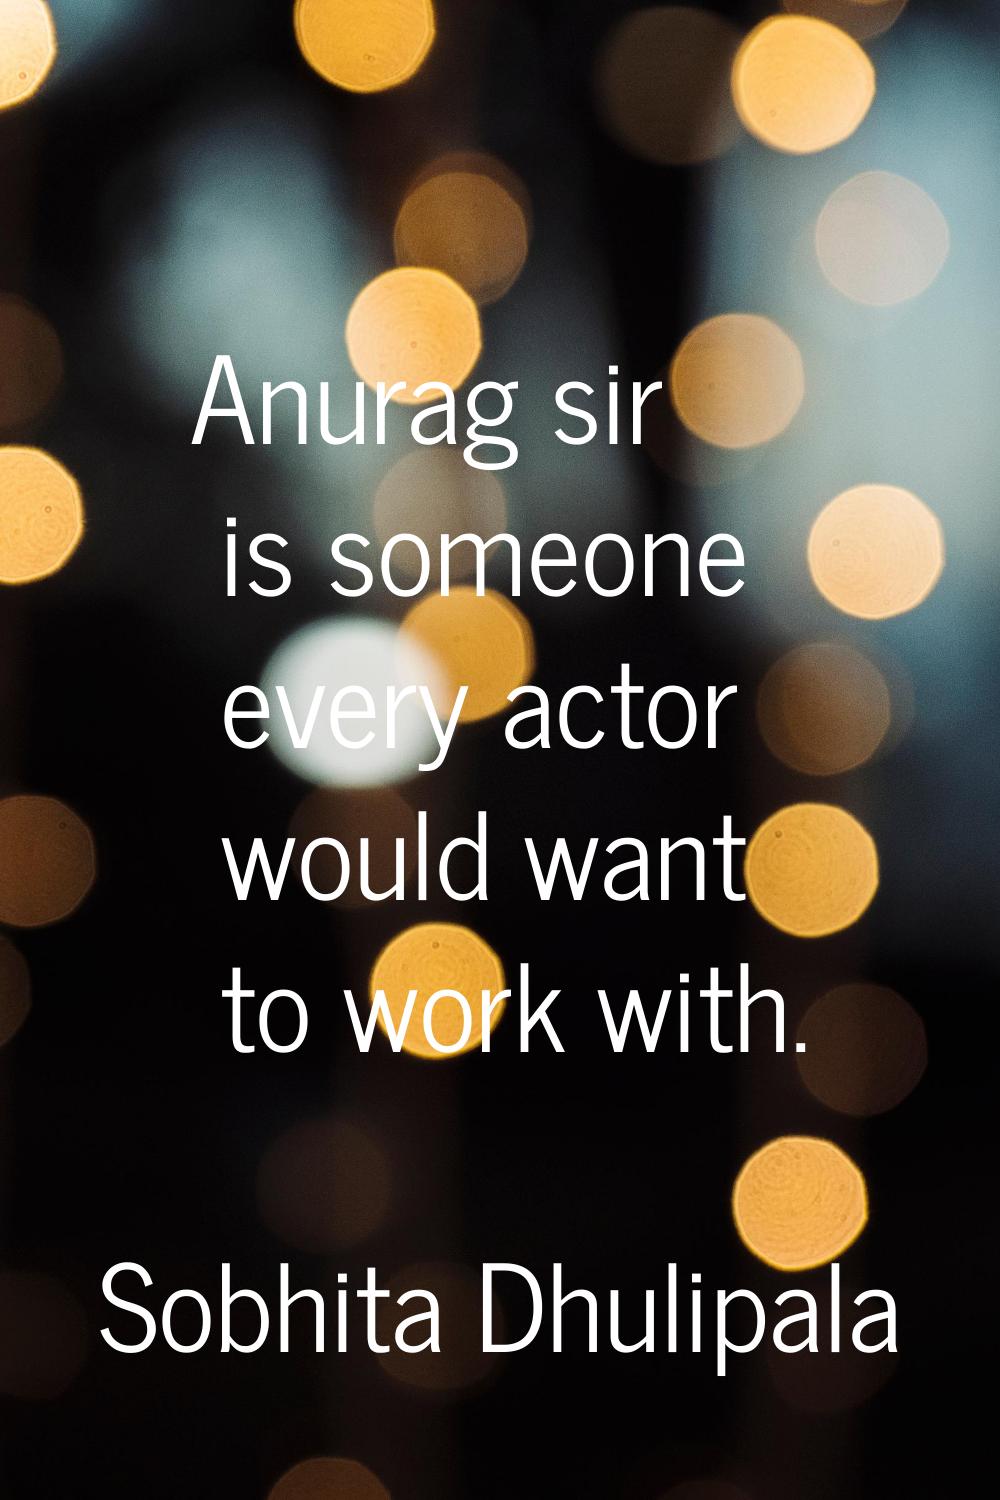 Anurag sir is someone every actor would want to work with.